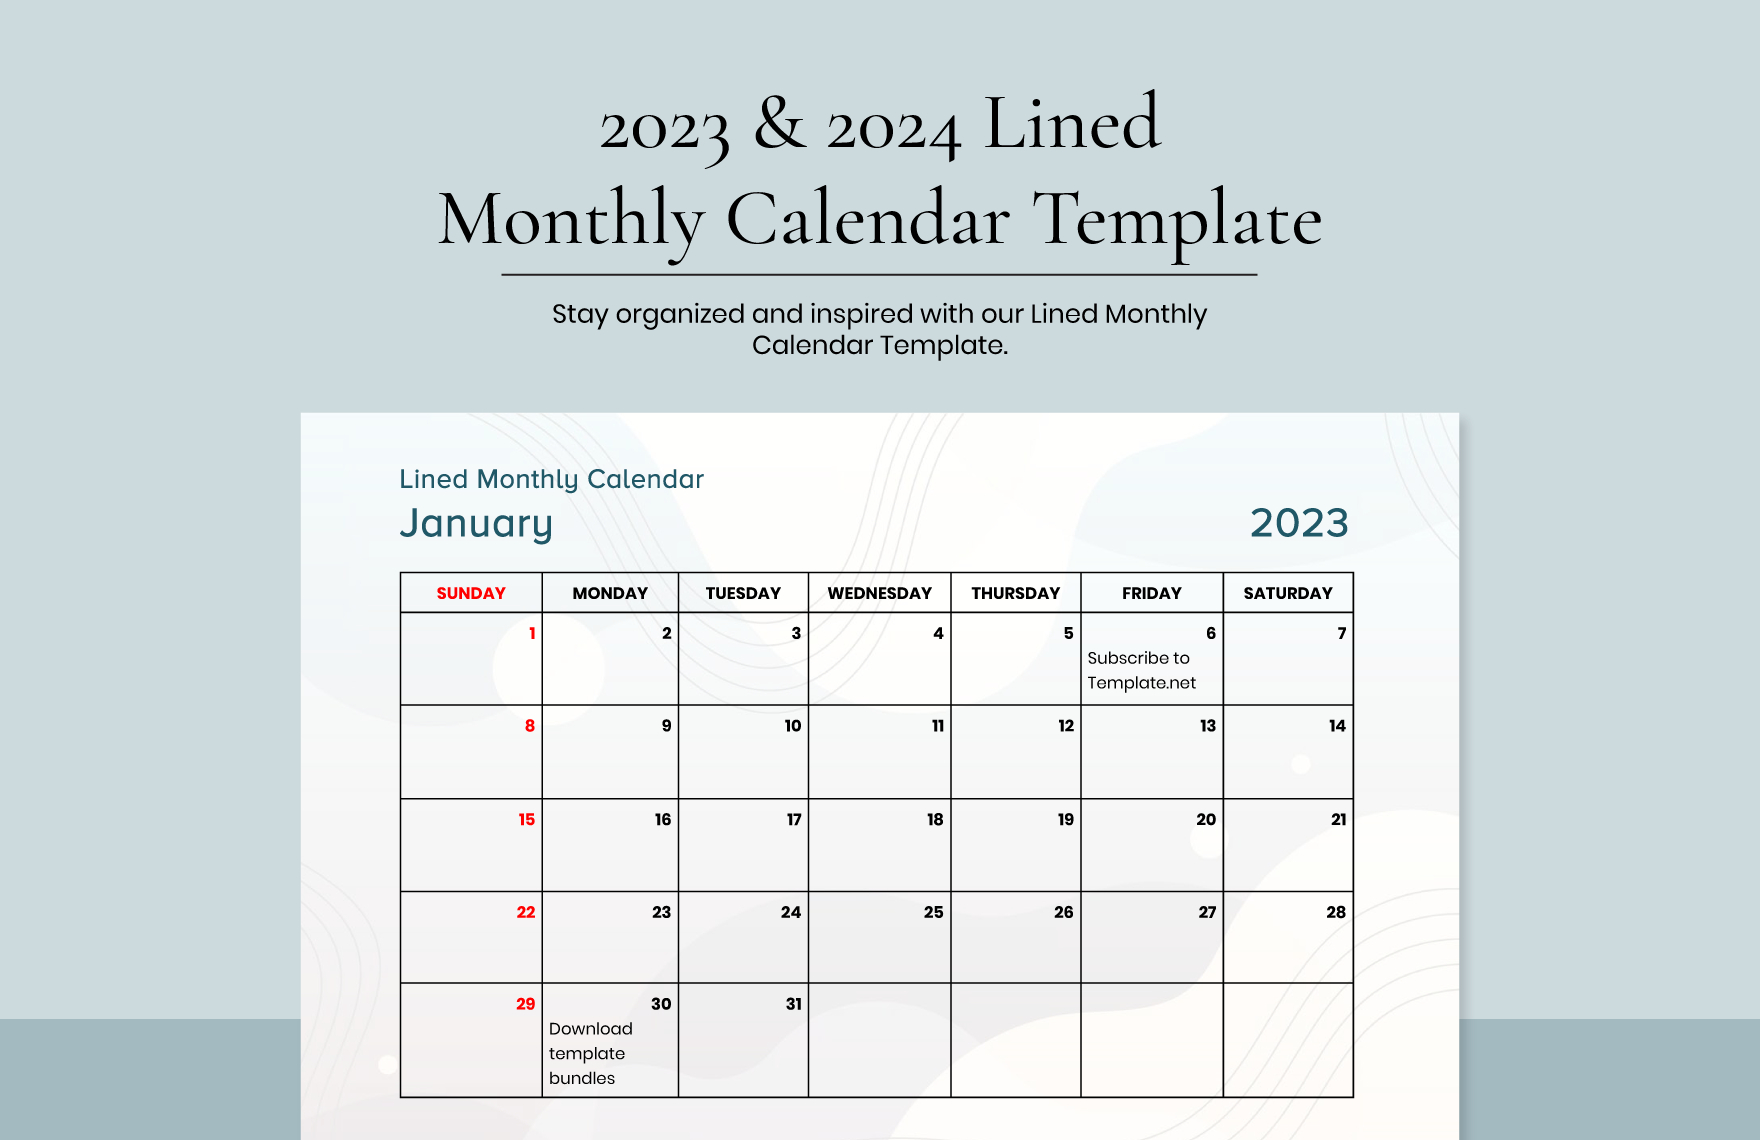 2023 &Amp;Amp;Amp; 2024 Lined Monthly Calendar Template - Download In Word | Calendar Template 2024 Google Docs